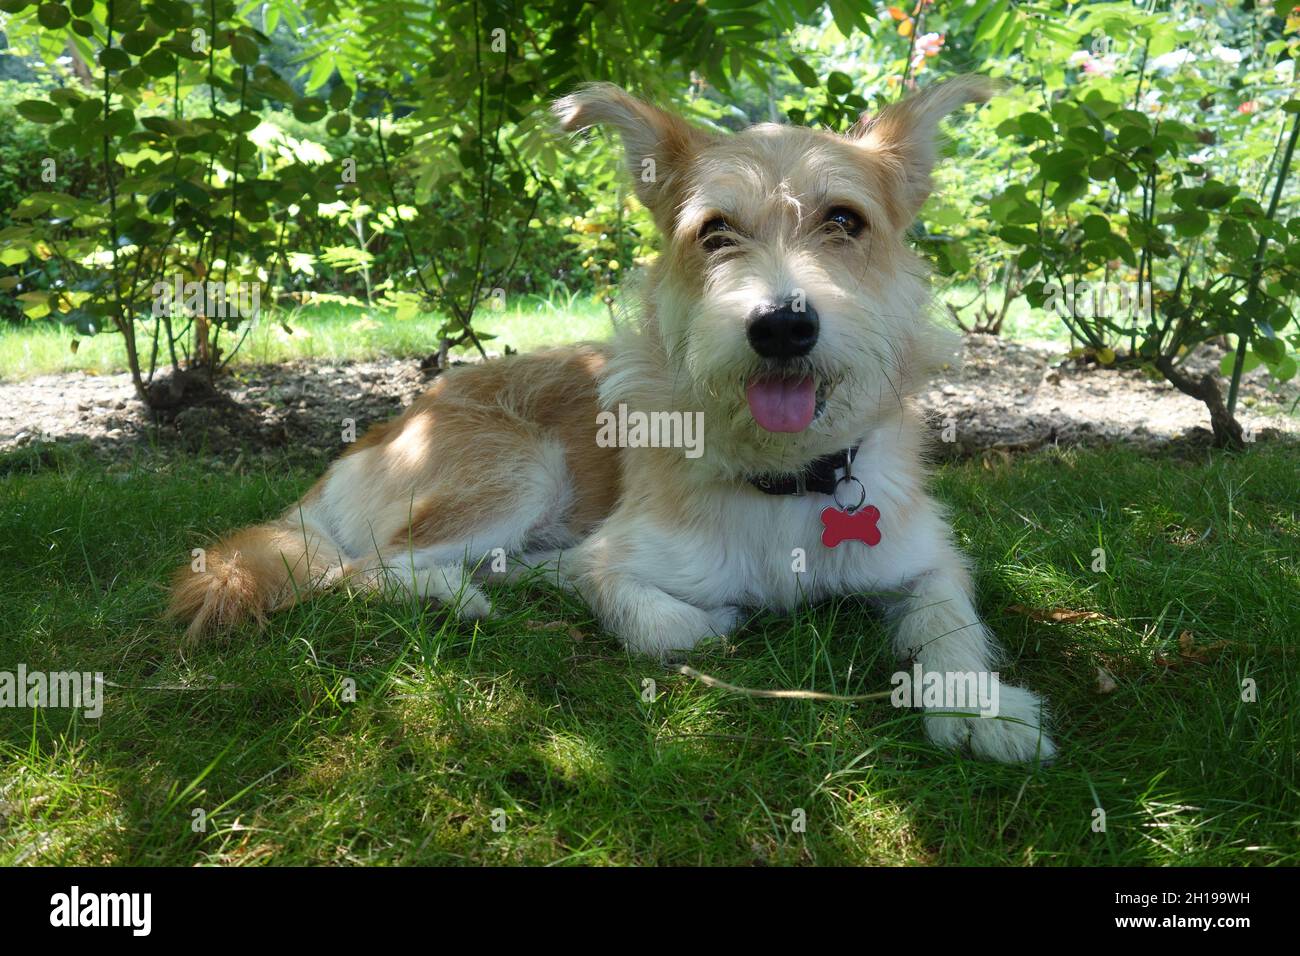 Cute half breed fawn and white young dog sitting on grass, with lively loving glance. Portrait of sweet tousled and moustached  medium sized dog. Stock Photo